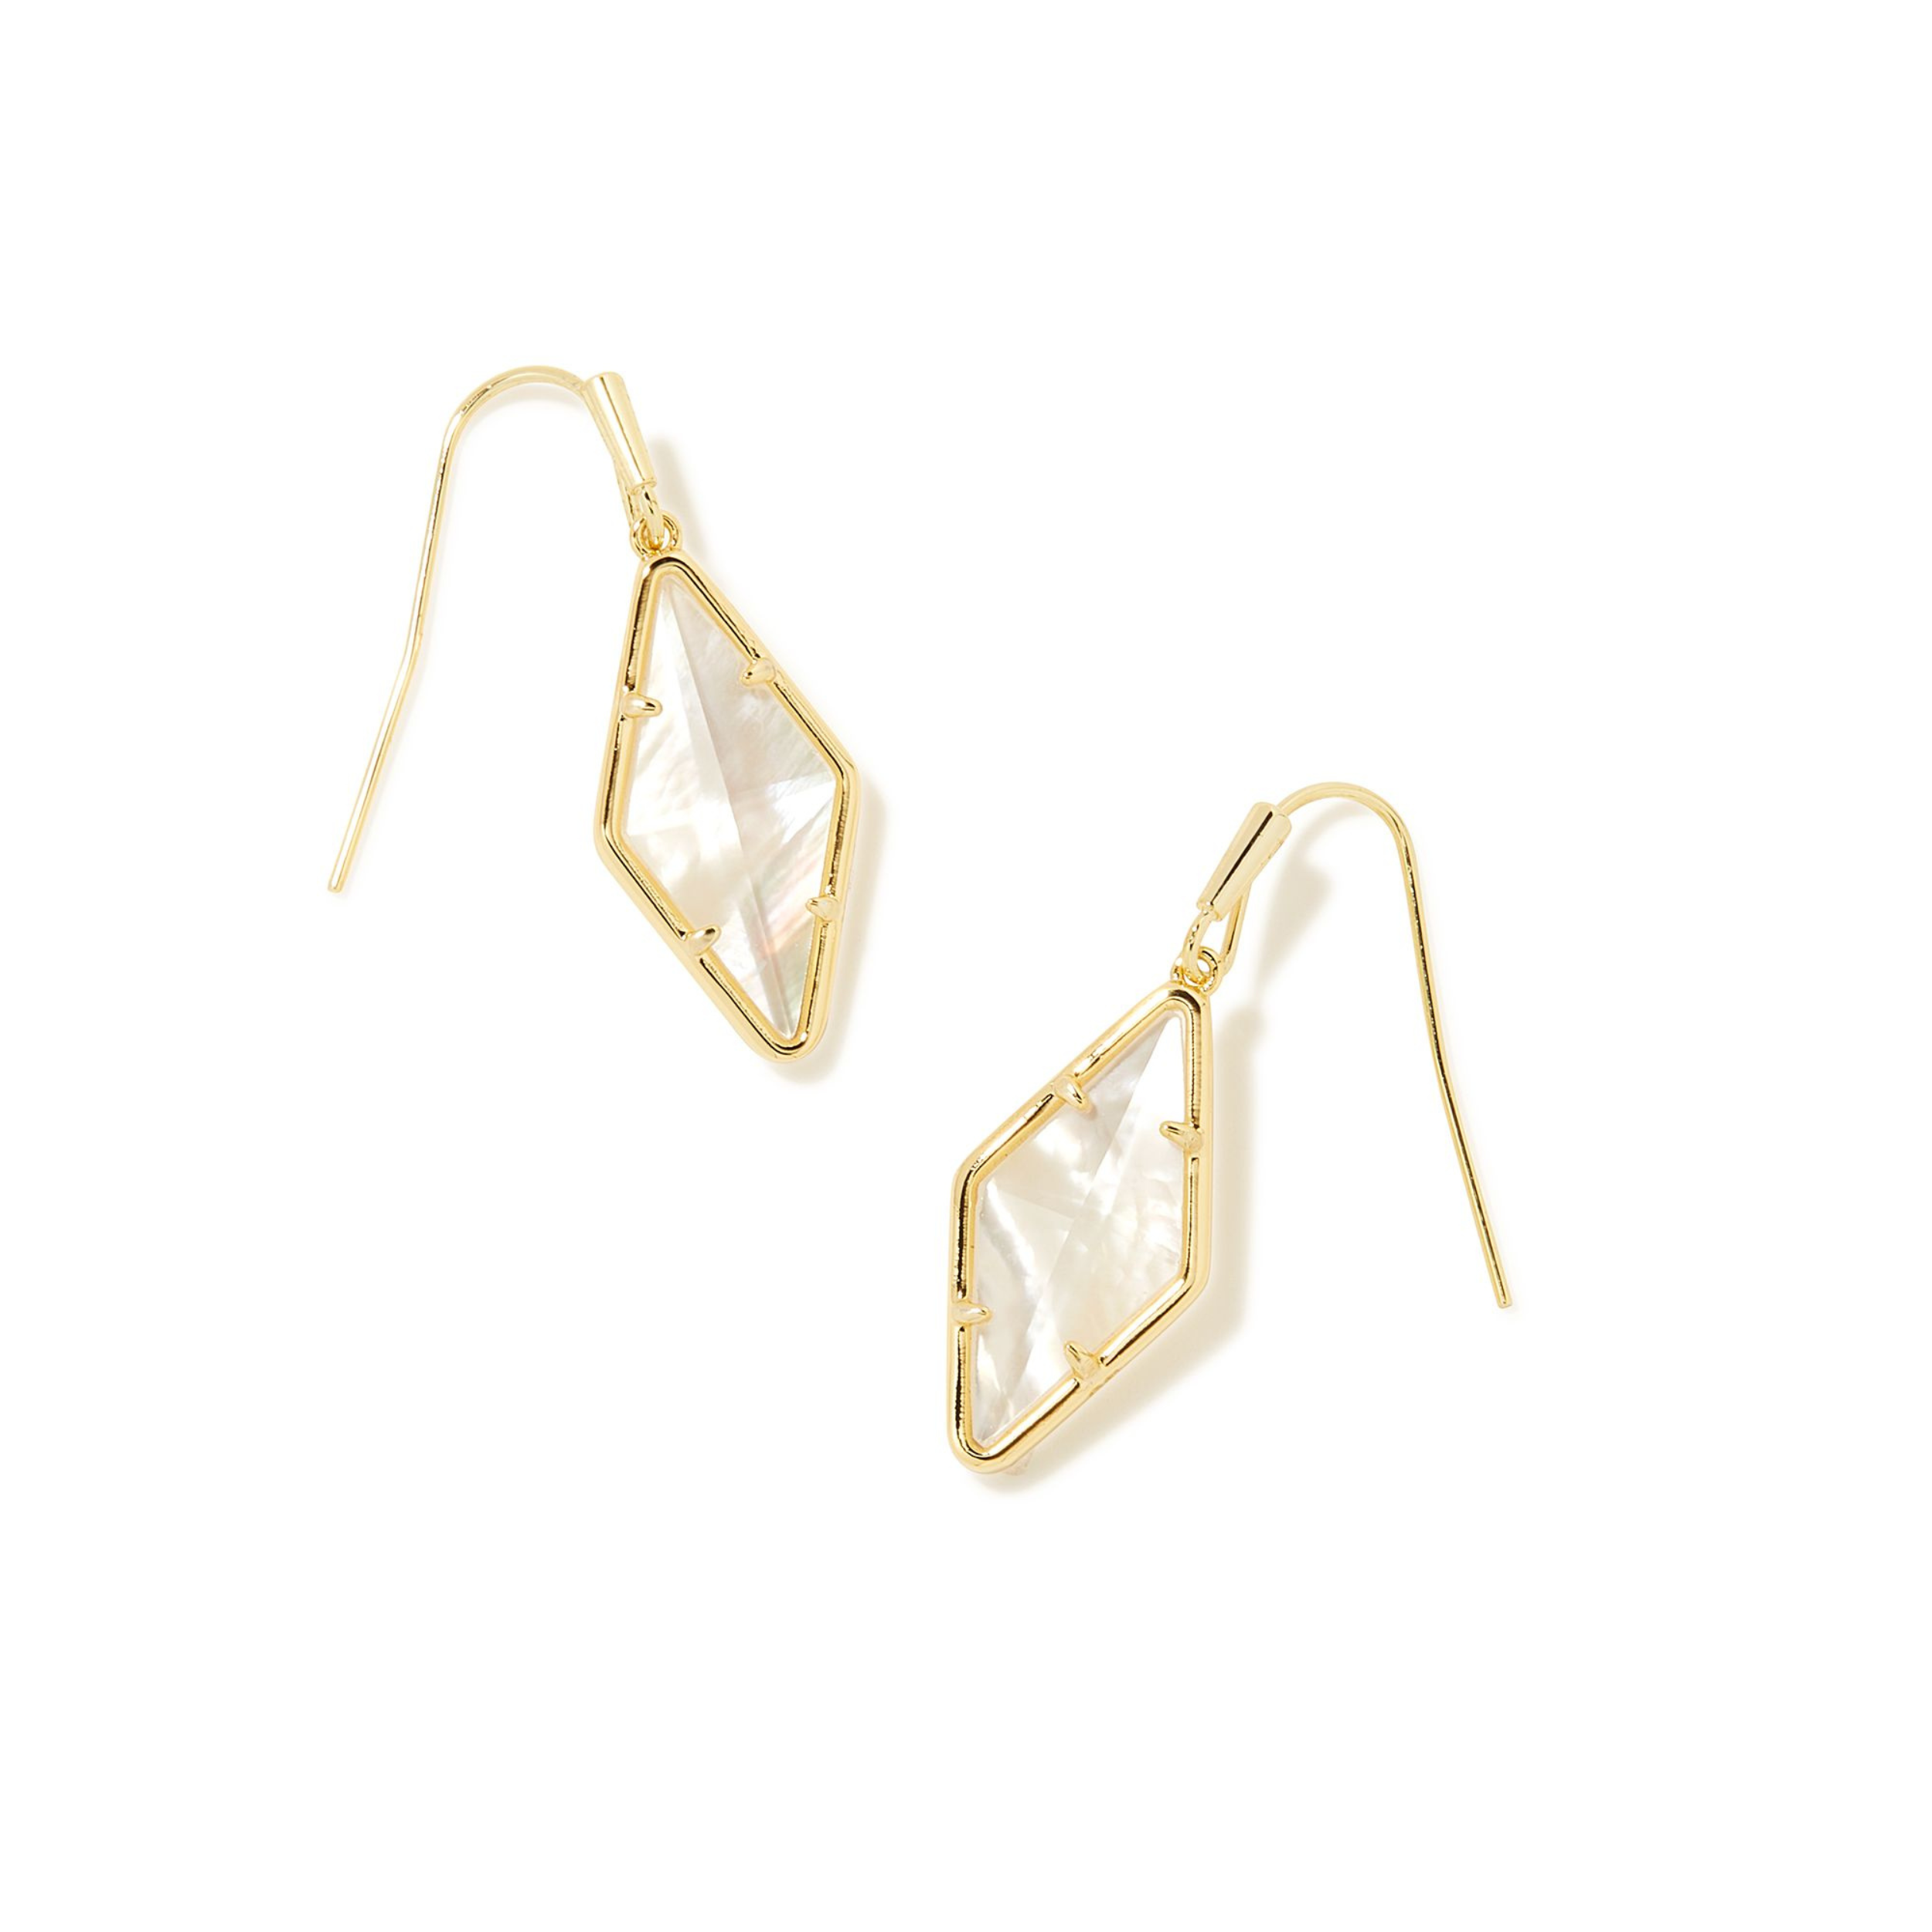 Gold, fish hook diamond drop earrings with an ivory mother of pearl stone pictured on a white background.